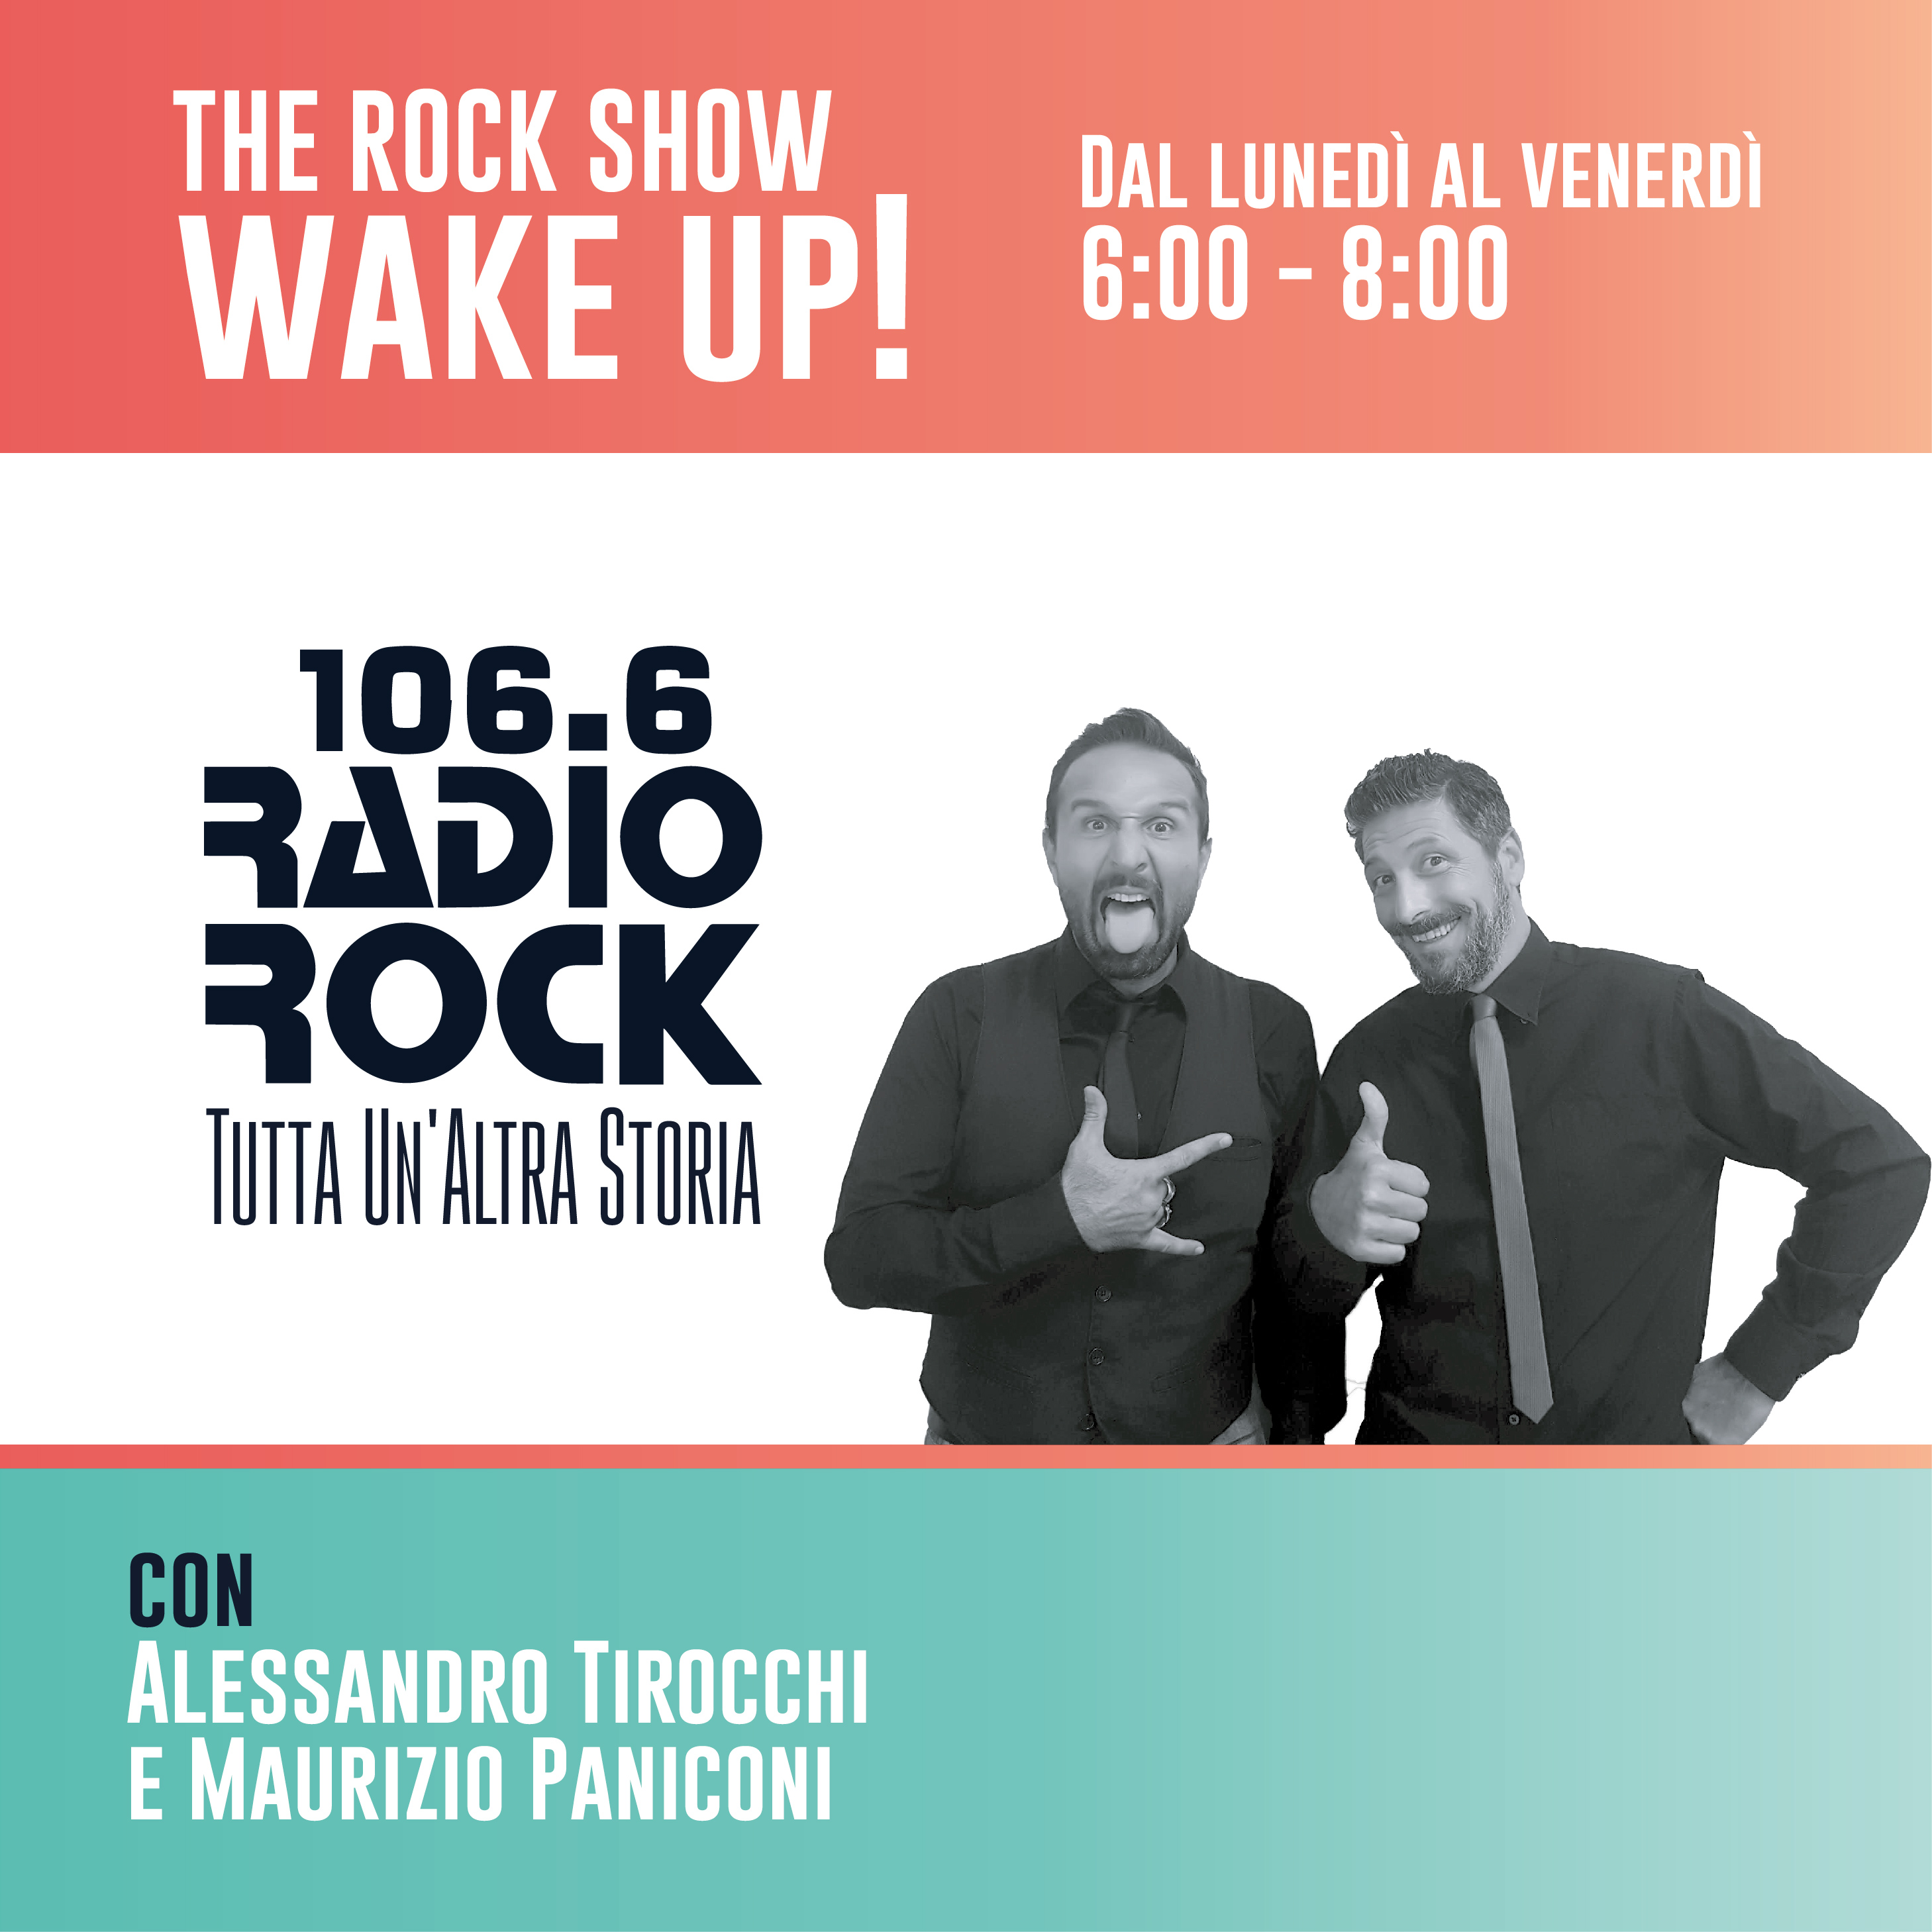 The Rock Show: Wake Up! (30-09-20)